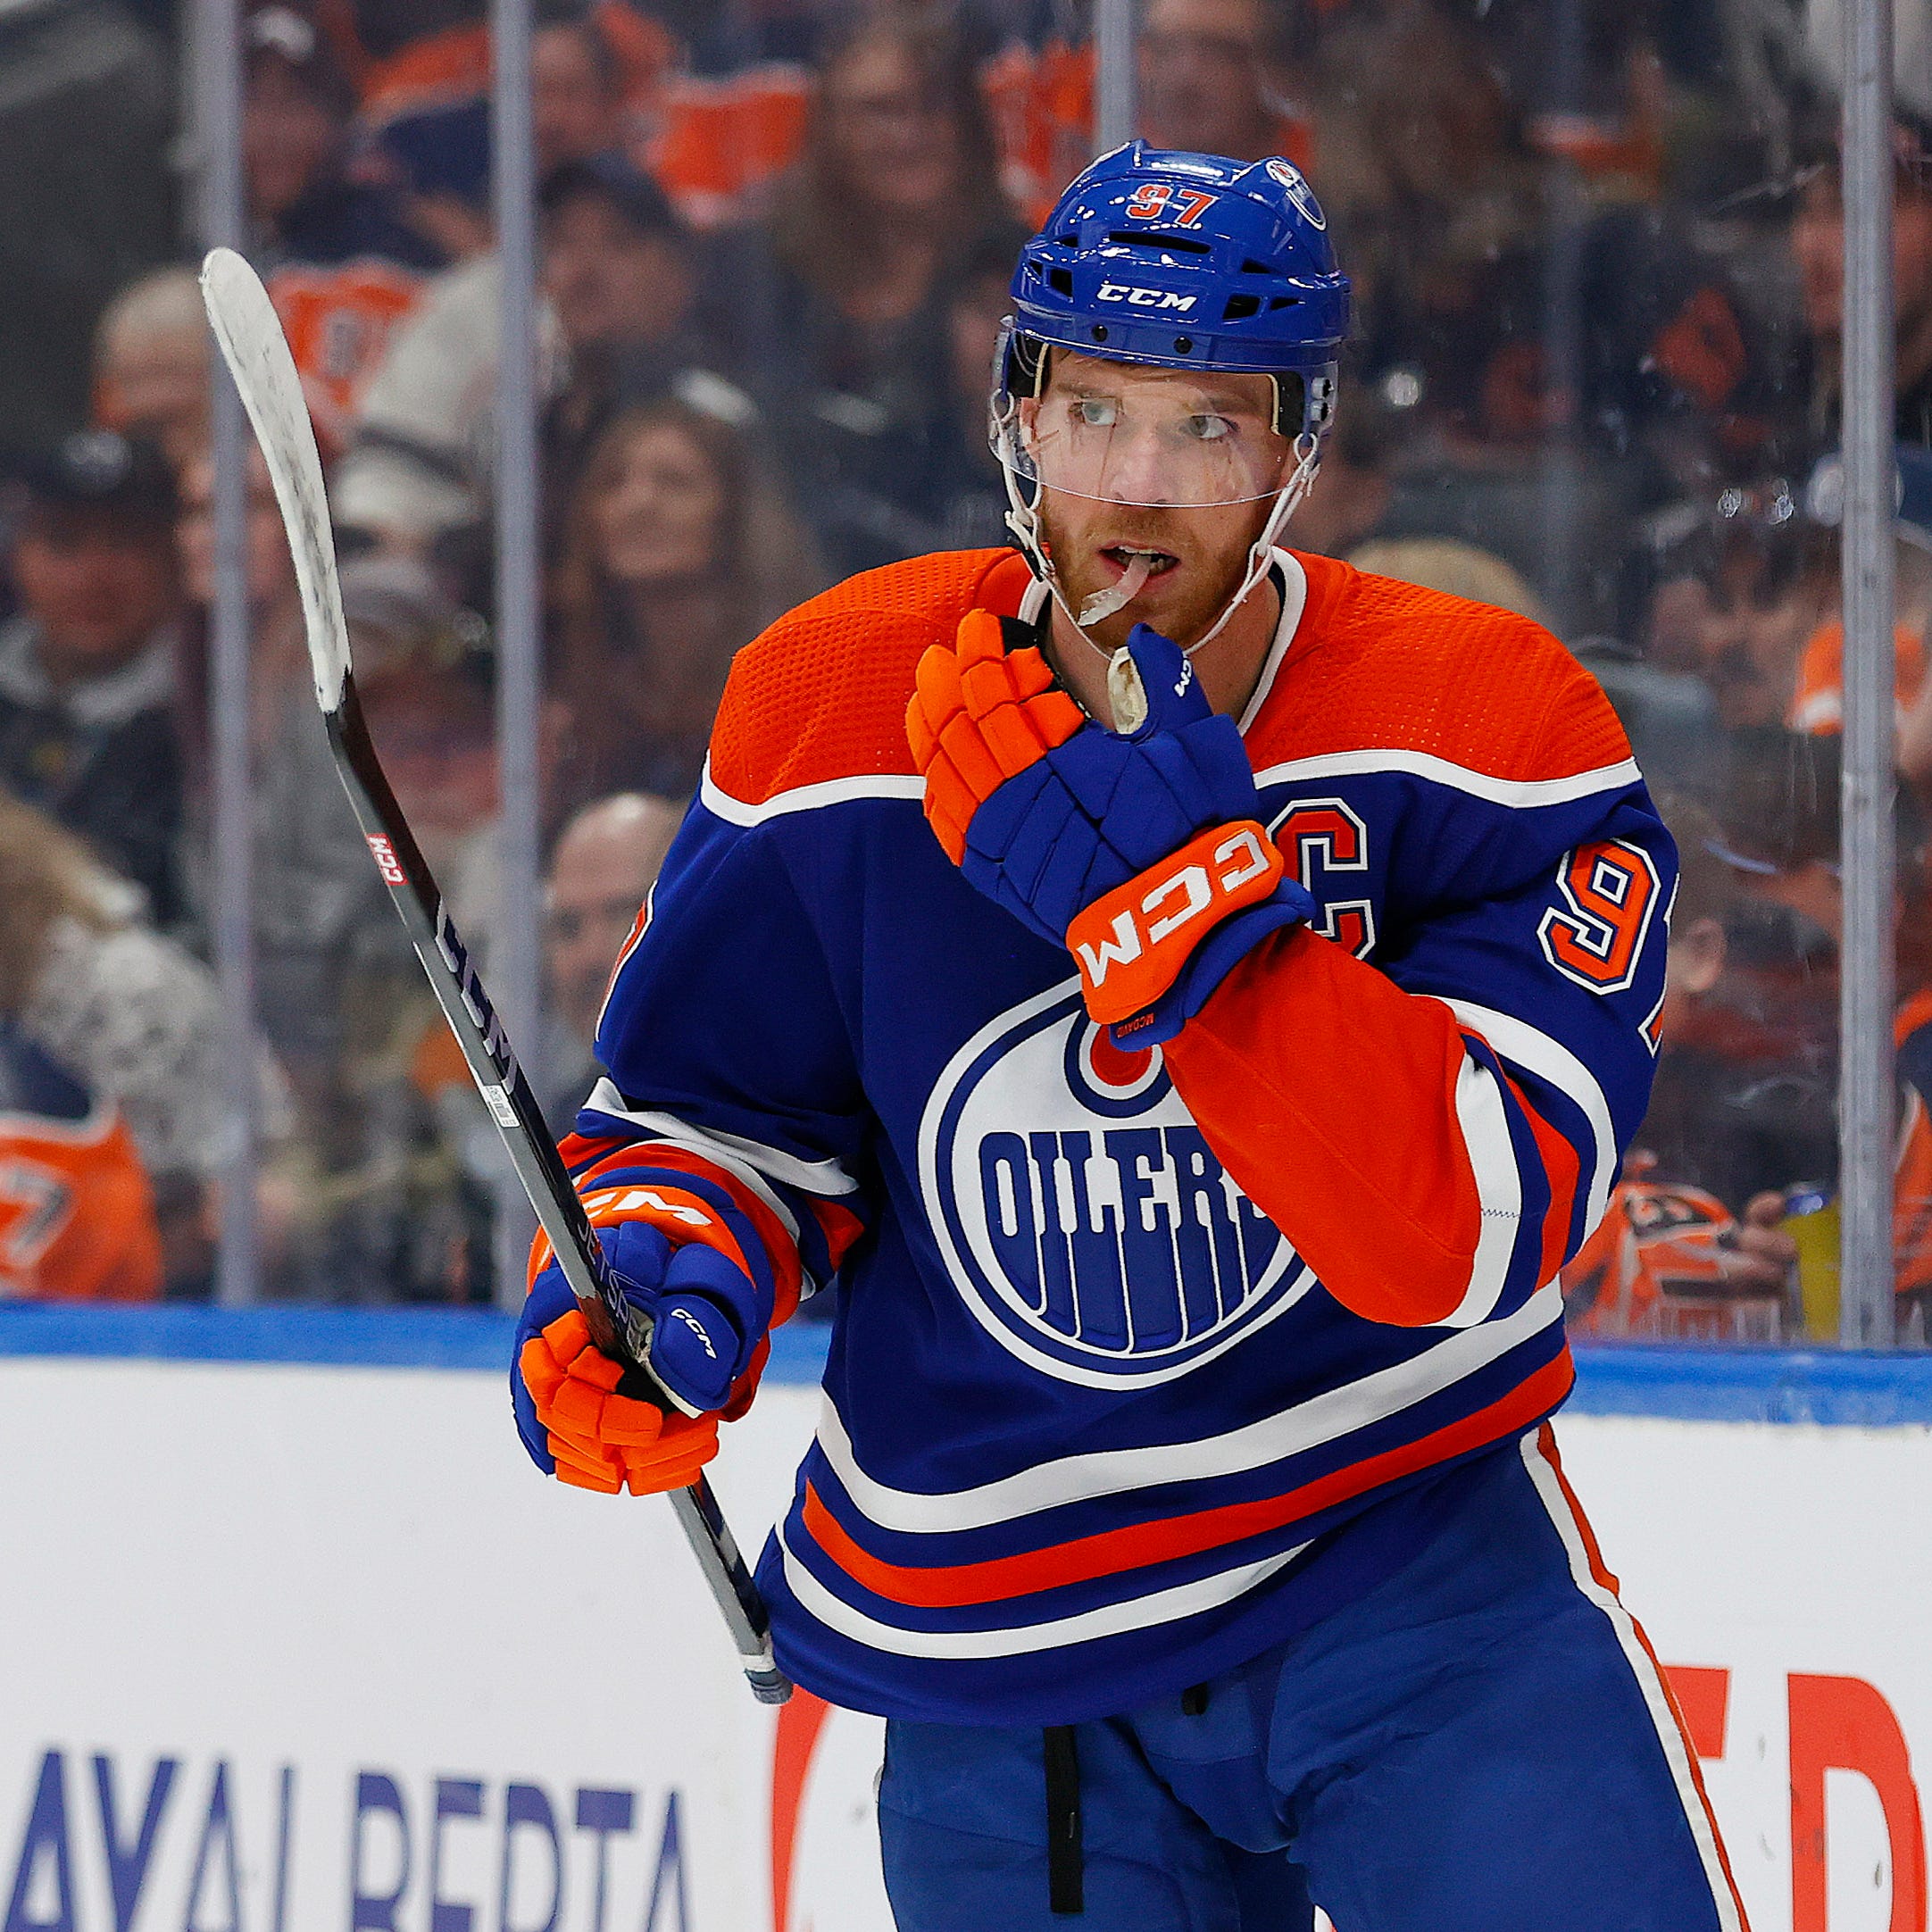 Edmonton Oilers forward Connor McDavid has hit 60 goals on the season with 10 games to play.